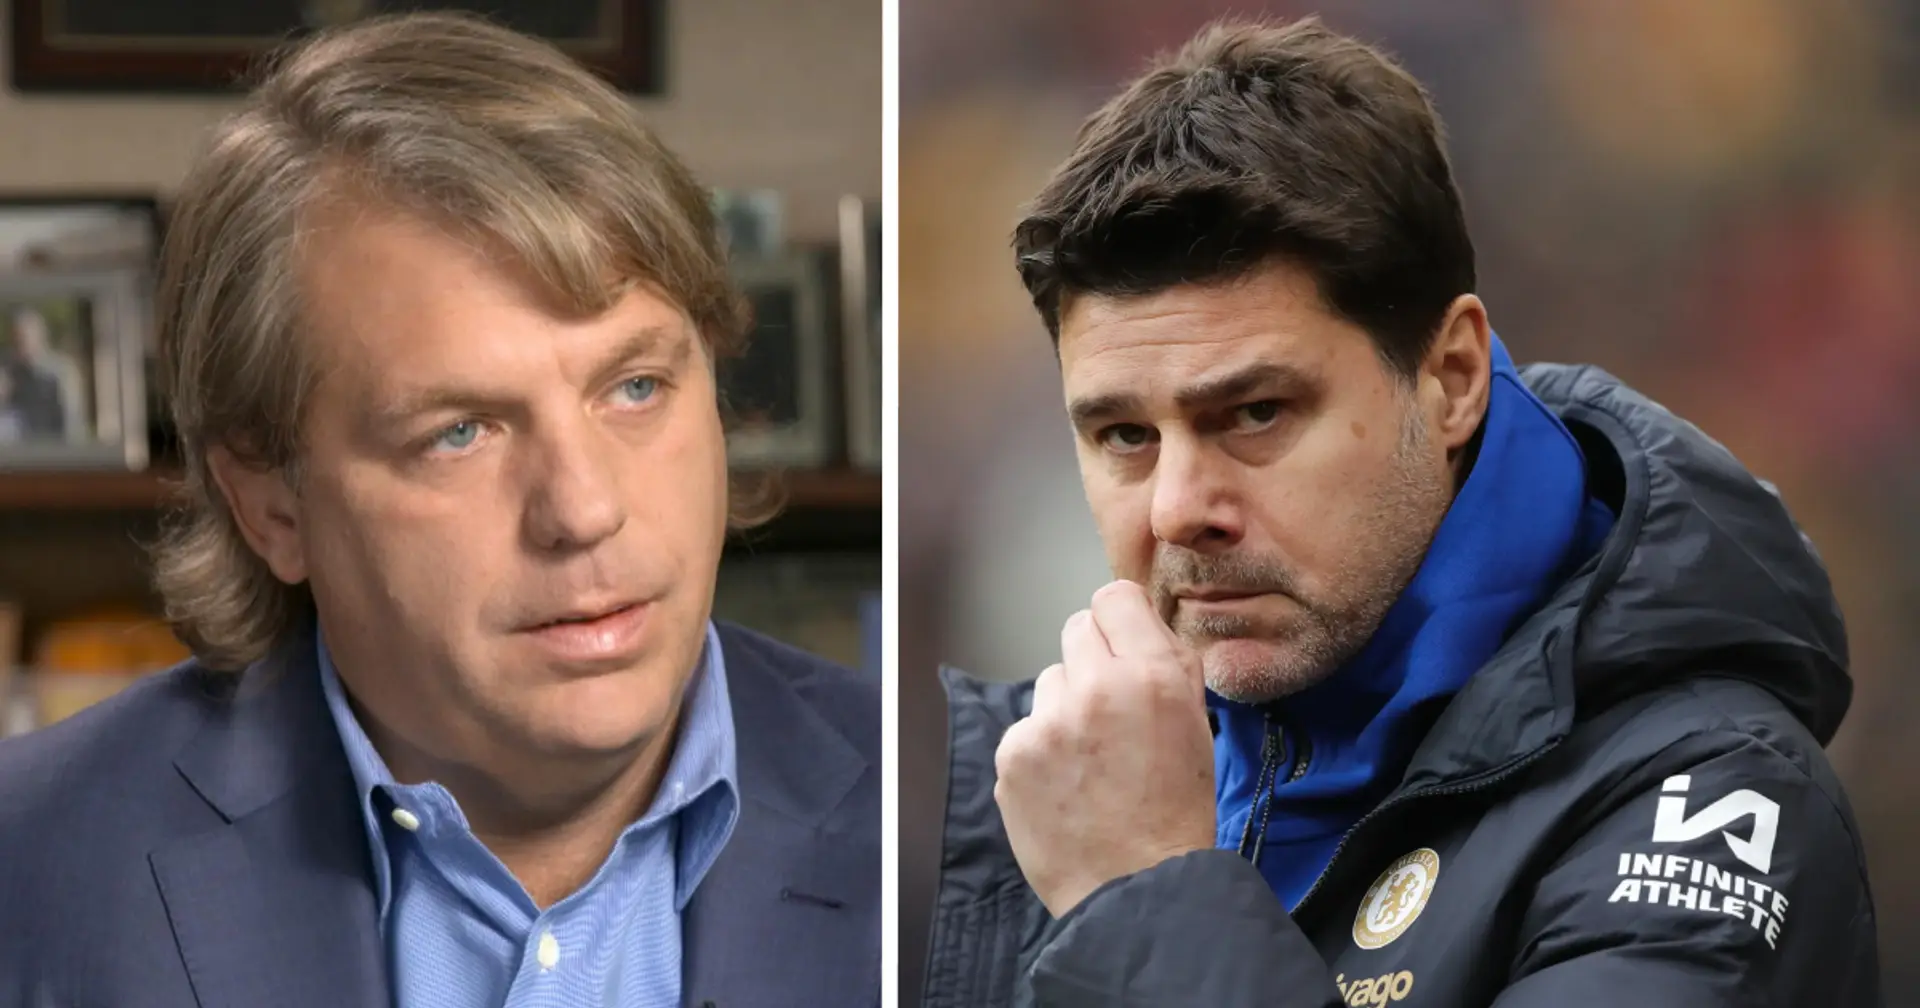 'Never seen anything change so quickly': Chelsea co-owner Boehly hints Pochettino will not be sacked